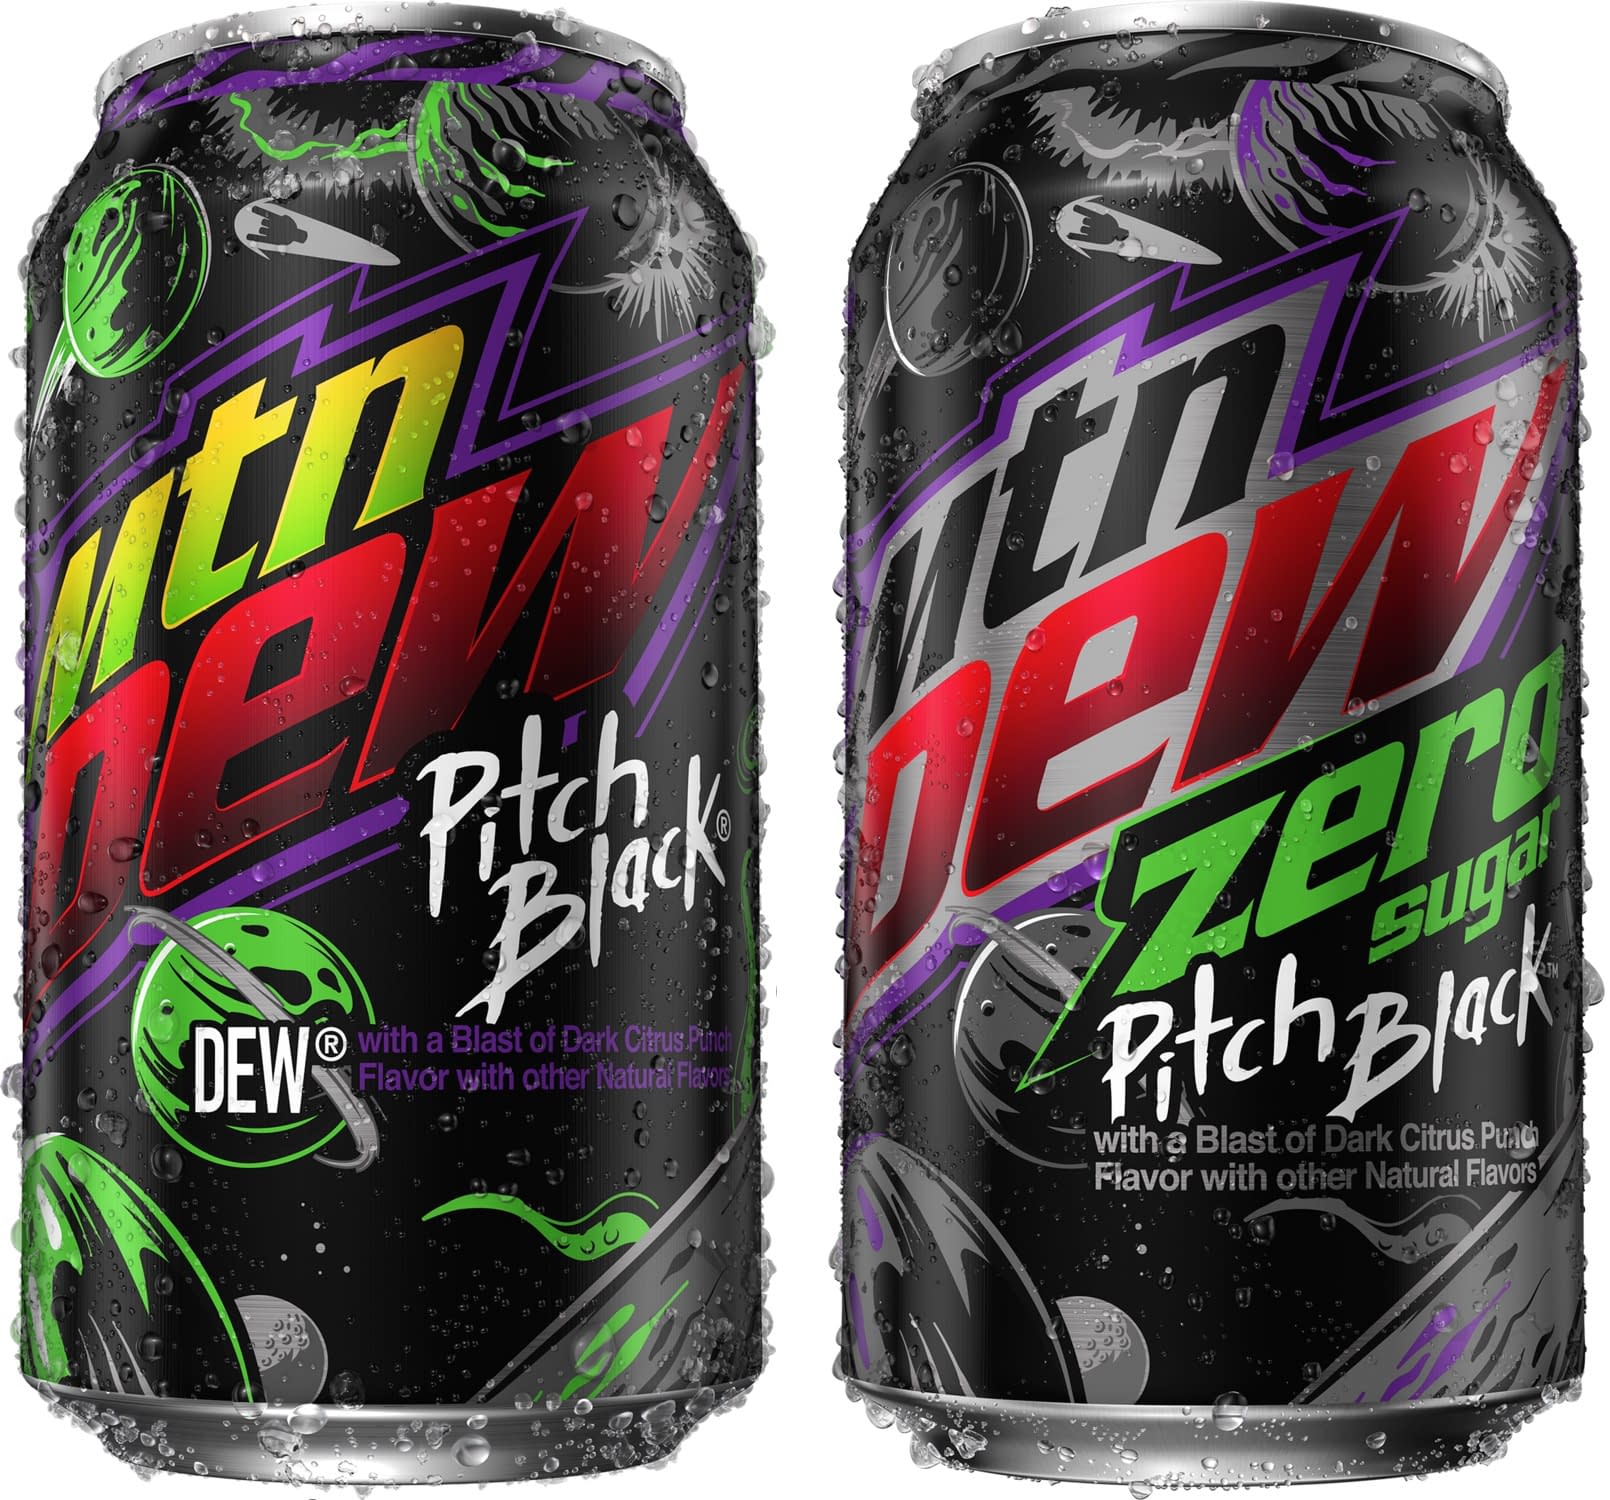 Mountain Dew Is Bringing Back The Pitch Black Flavor